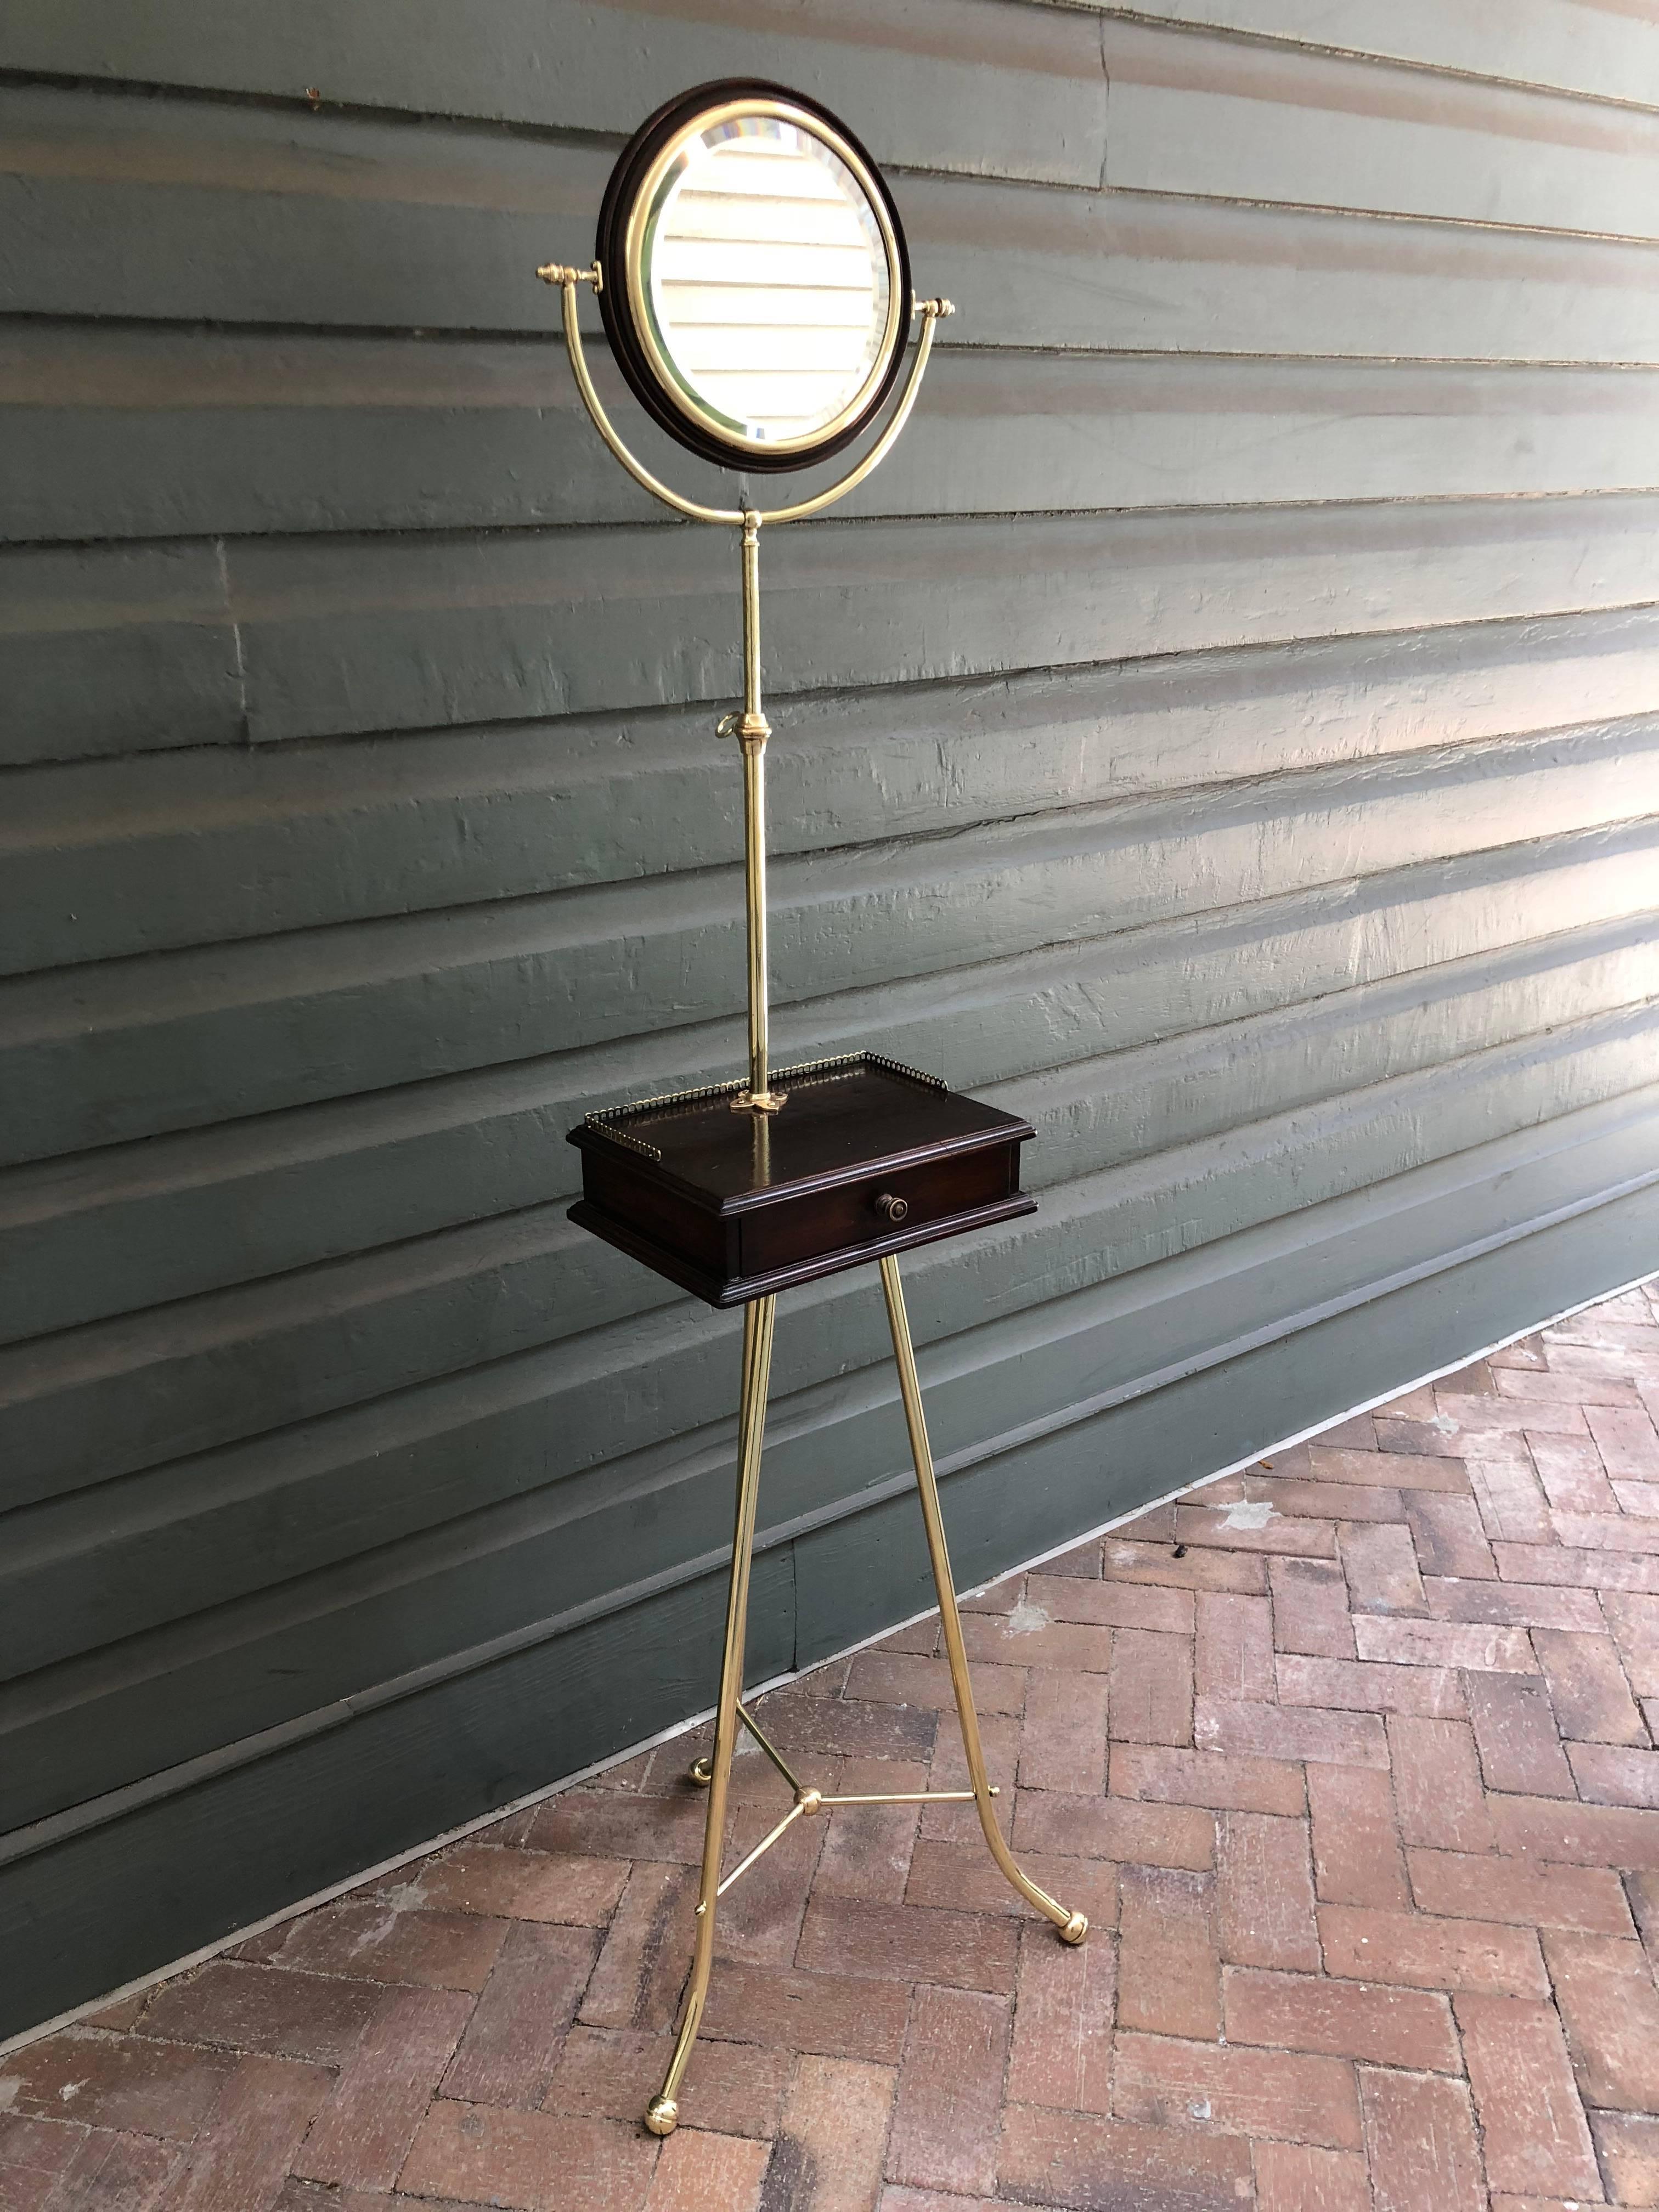 This 19th century British Colonial gentleman's campaign shaving stand is made with mahogany and brass. The looking glass is double sided with one side magnifying and one true. The mirror is mounted on a telescopic pole ending on a mahogany one